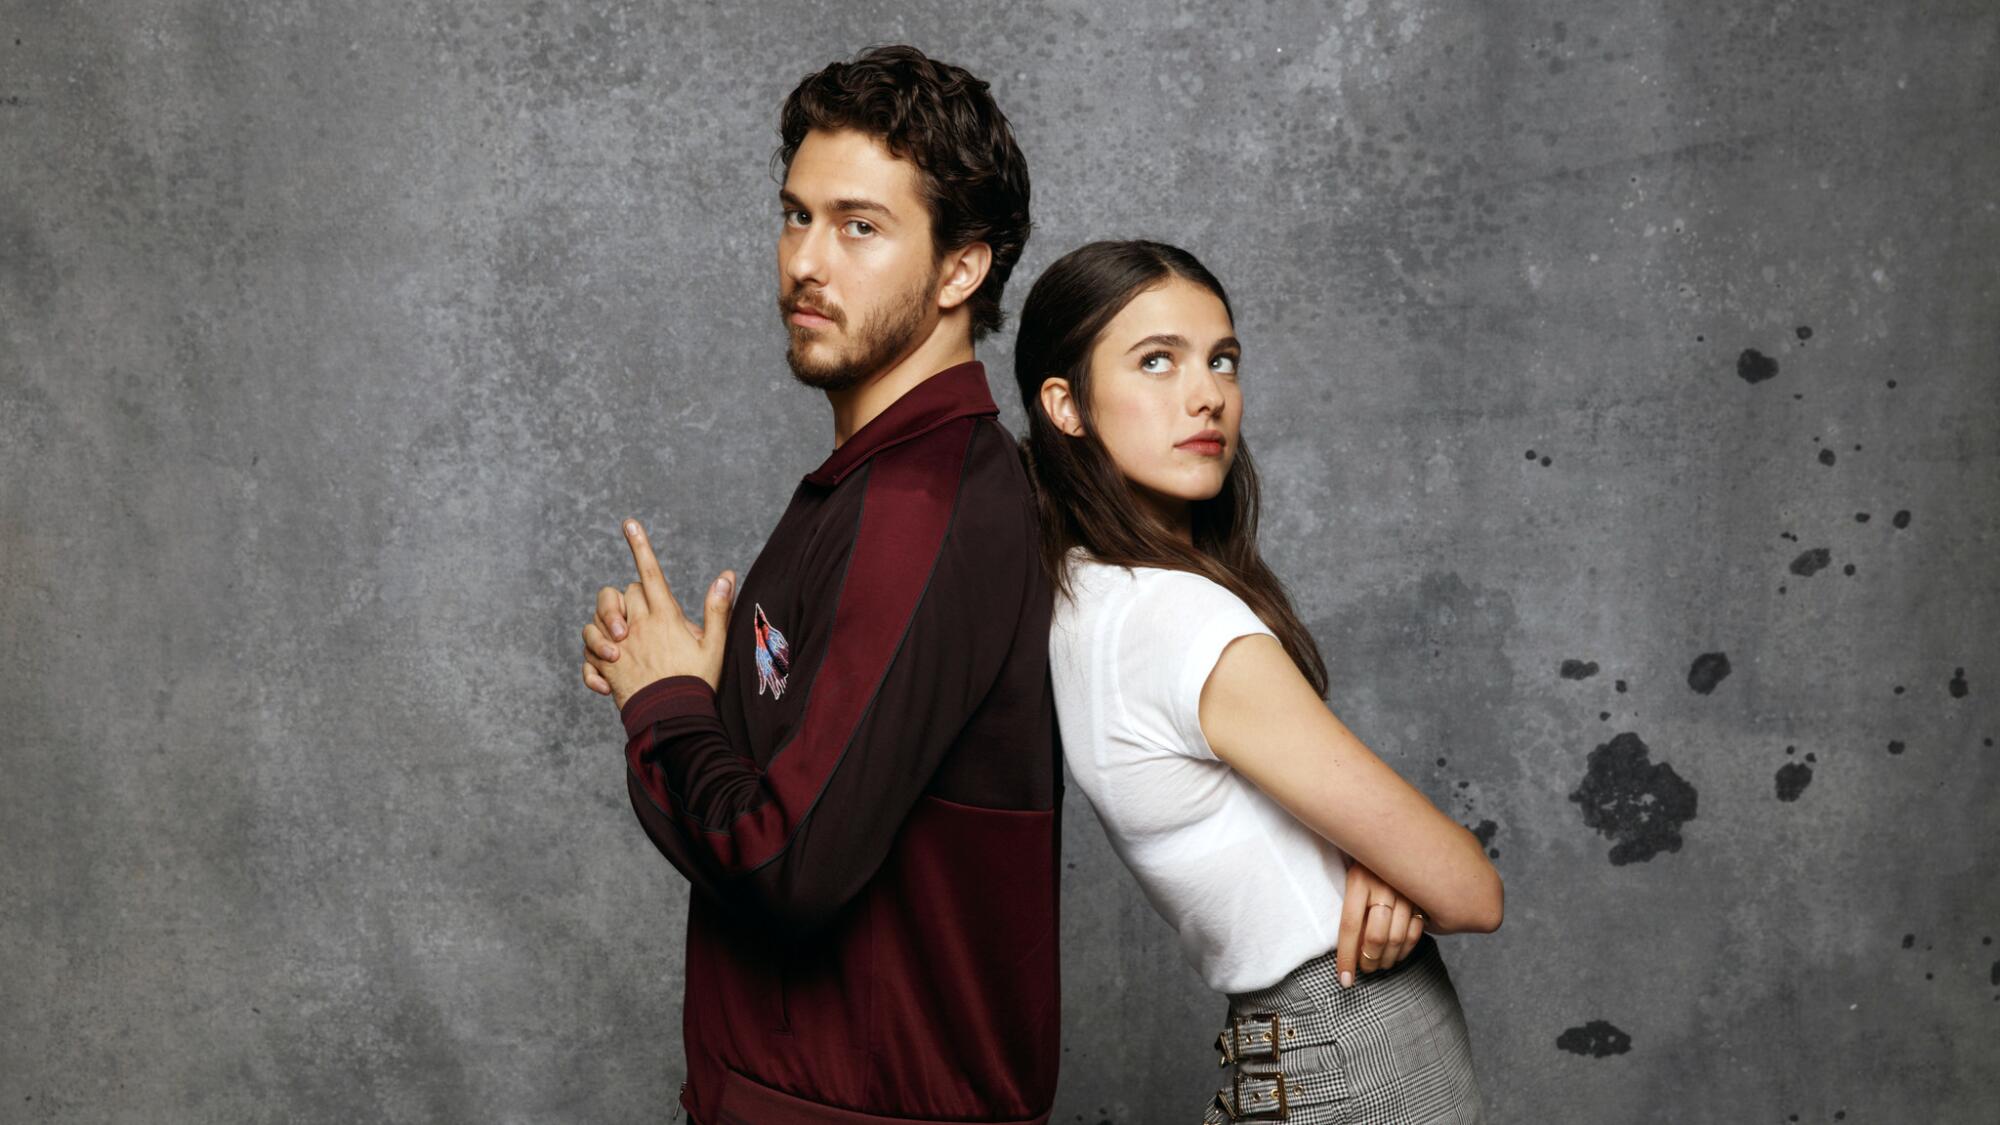 Nat Wolff and Margaret Qualley, from the film "Death Note," photographed at Comic-Con 2017